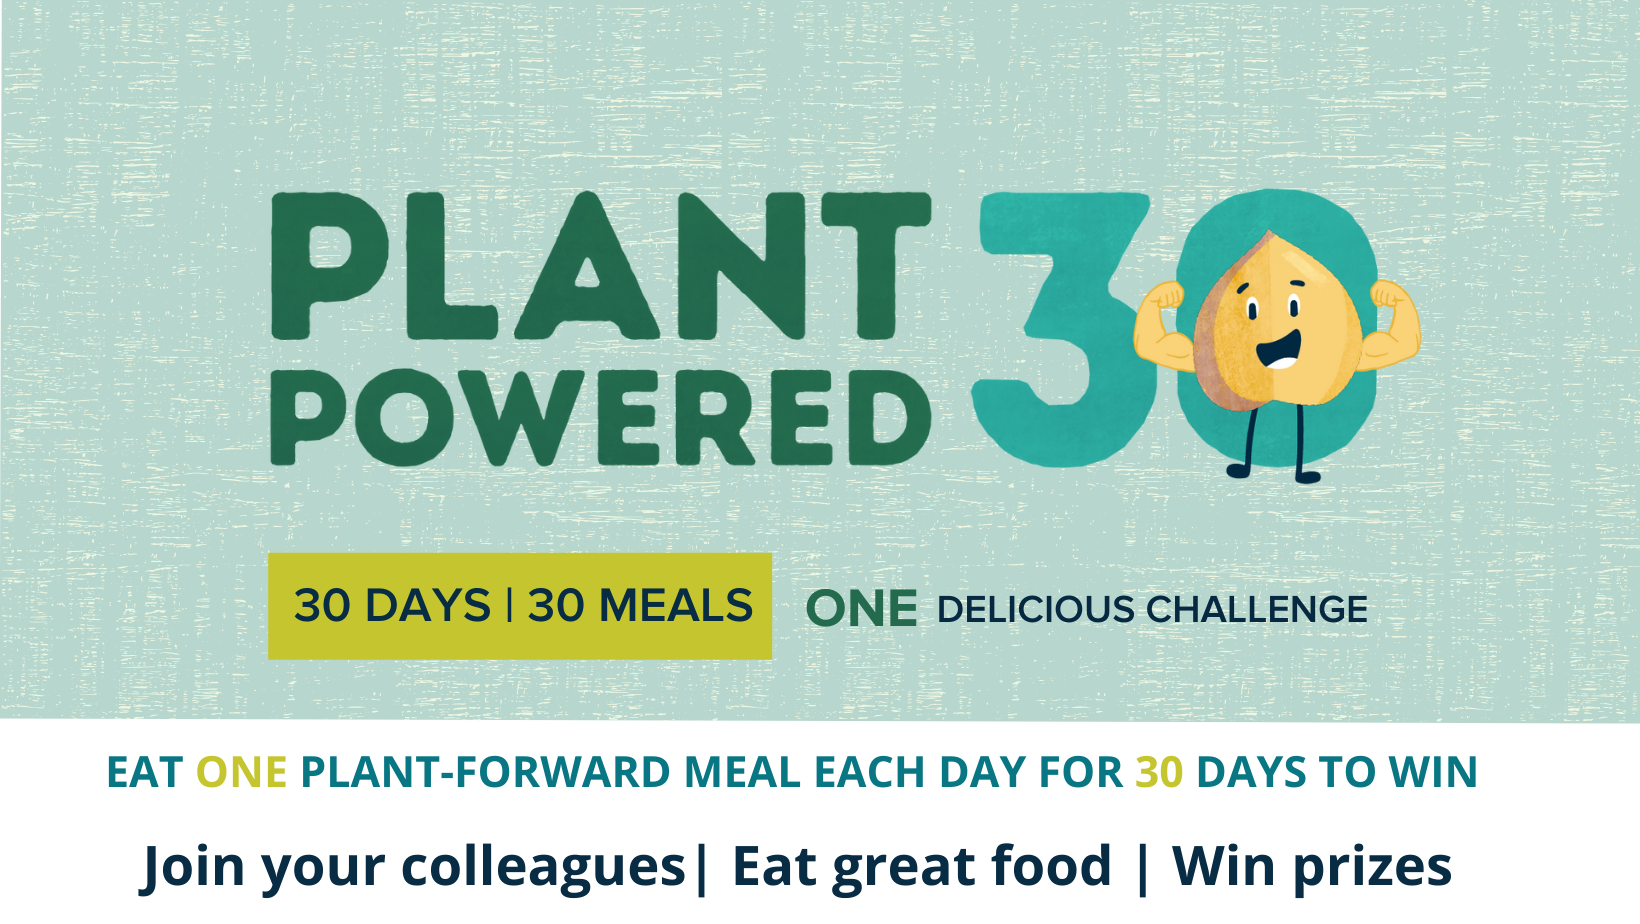 Plant Powered 30 feature image